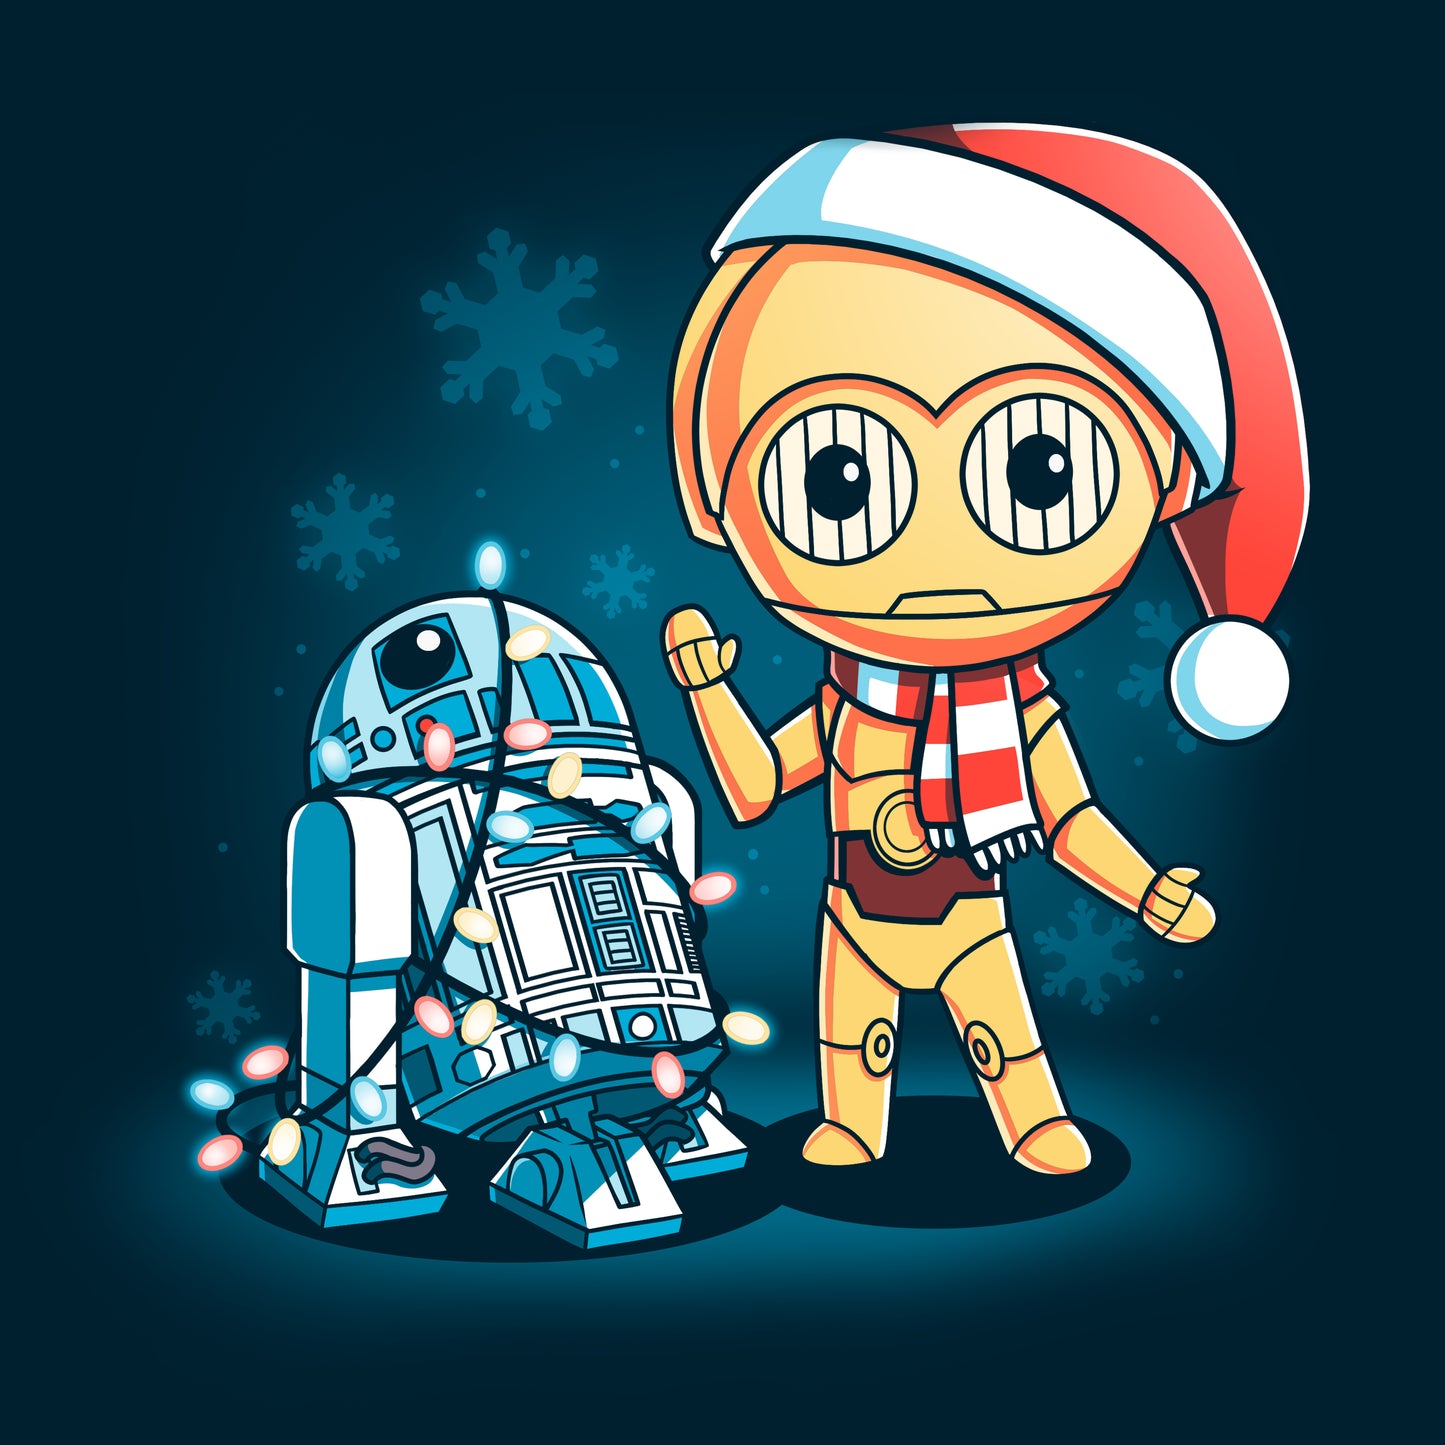 Officially licensed Star Wars Festive R2-D2 and C-3PO T-shirt.